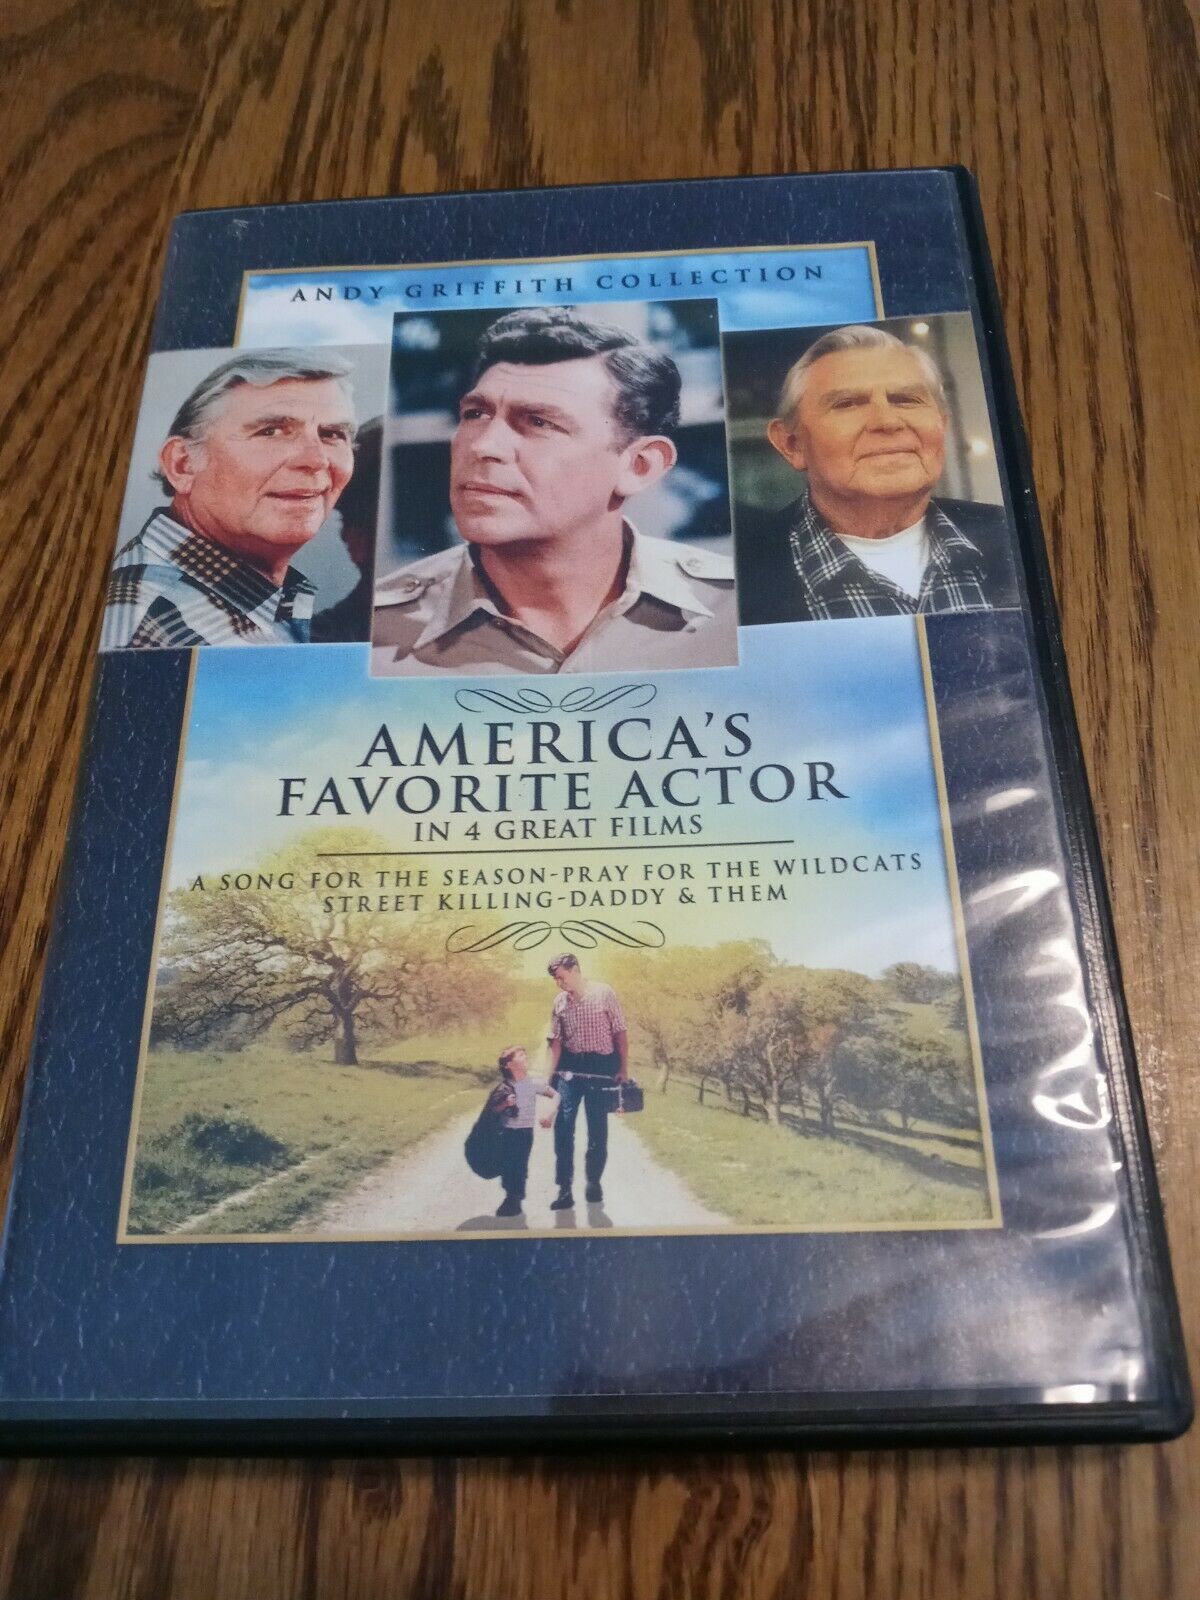 Primary image for Andy Griffith Collection America's Favorite Actor in 4 Films DVD